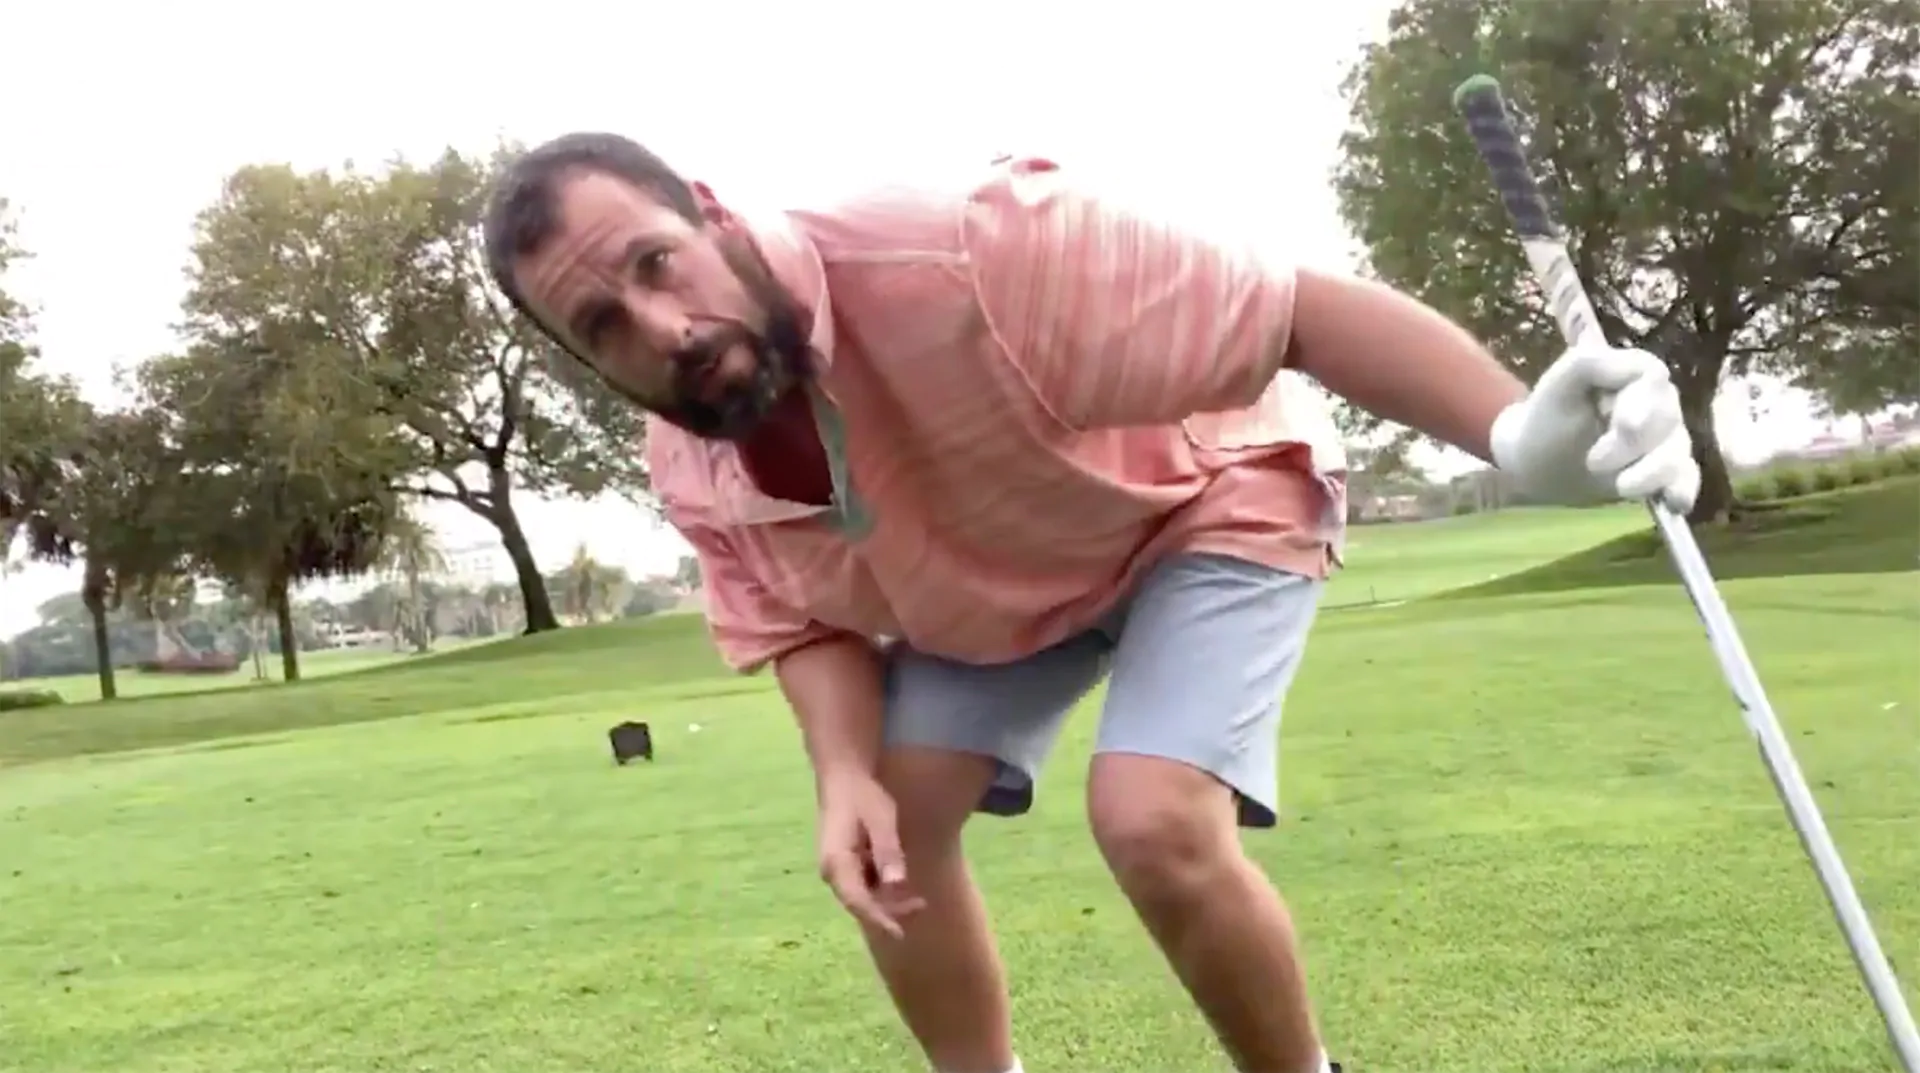 Watch: 25 years after movie release, Adam Sandler dusts off ‘Happy Gilmore’